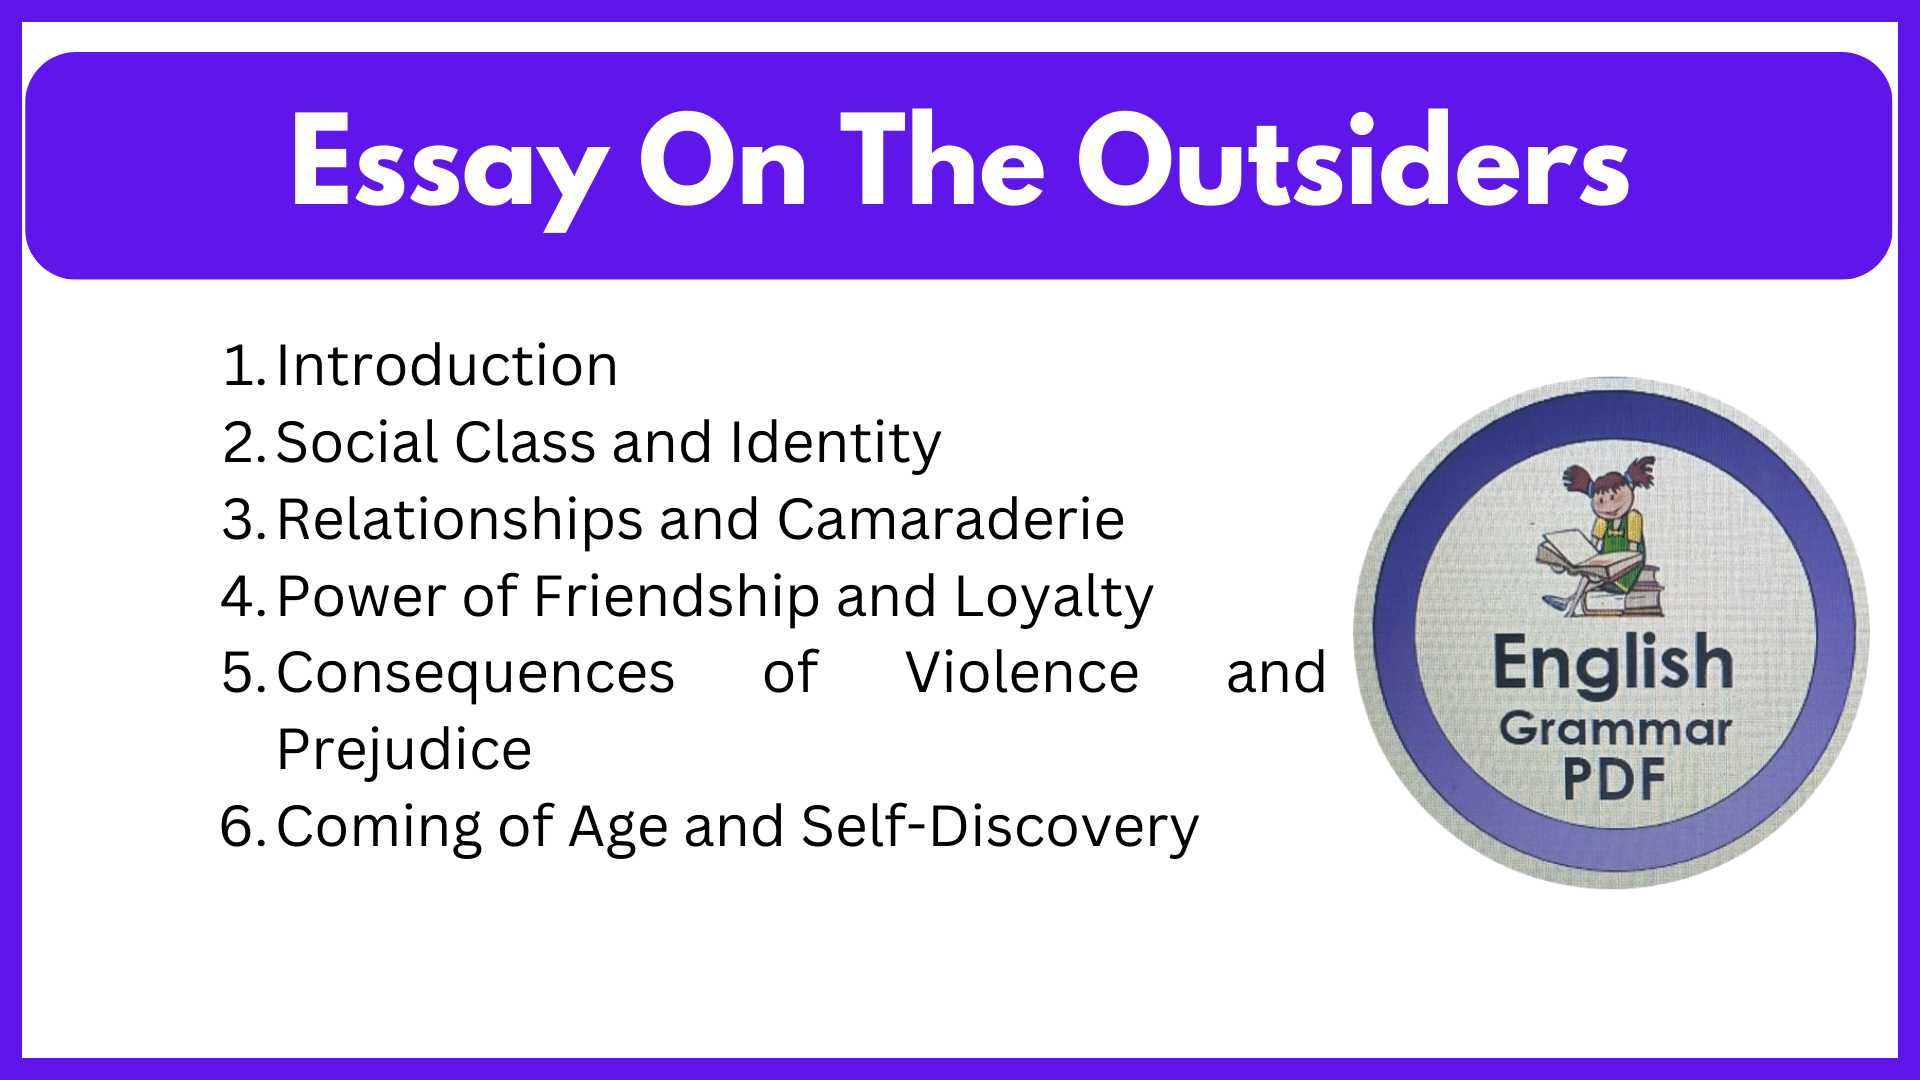 Essay On The Outsiders